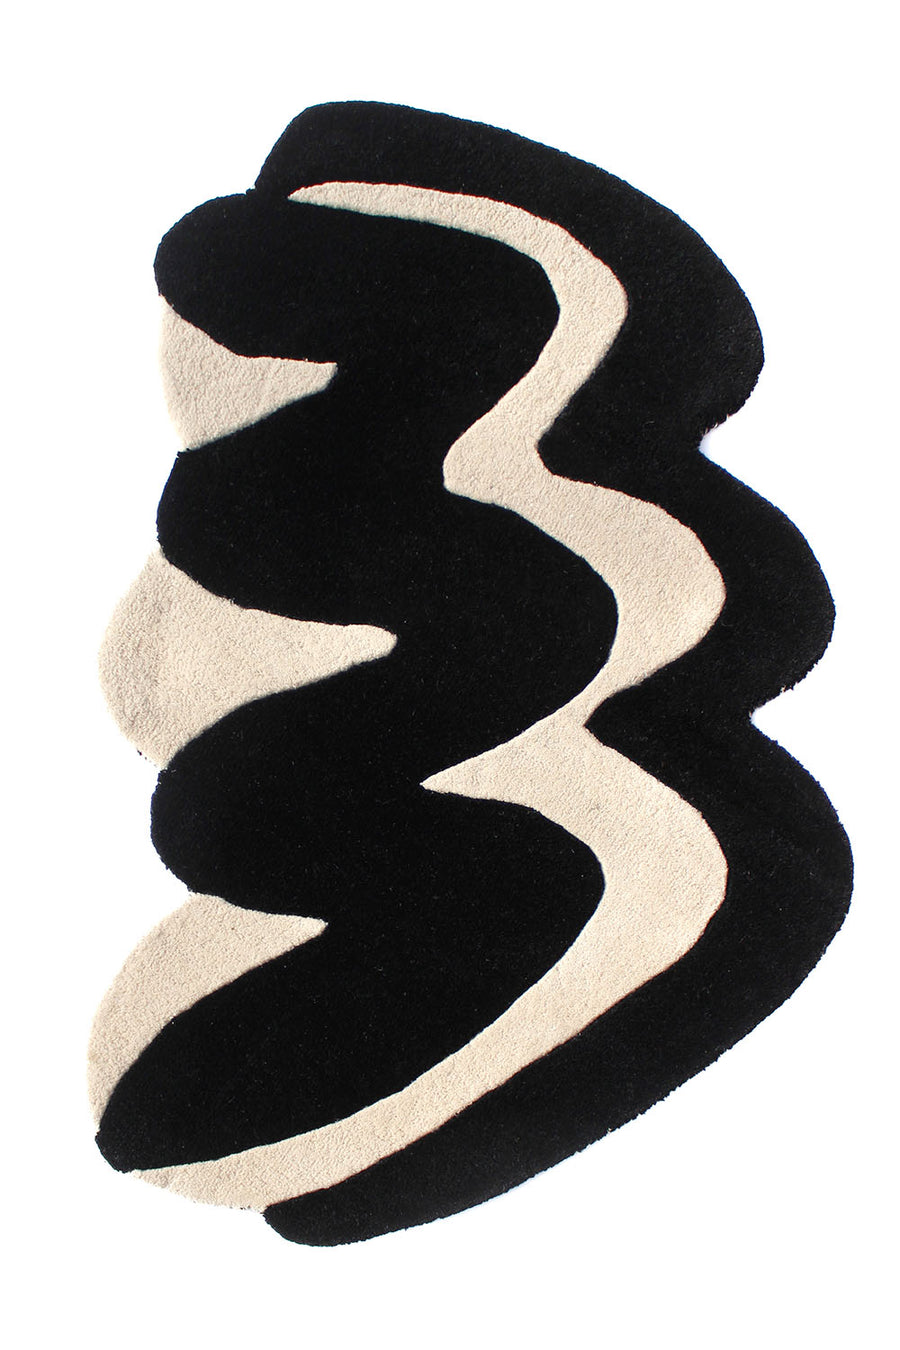 Wavy Zig Zag Hand Tufted Wool Rug in Black and Cream by Jubi